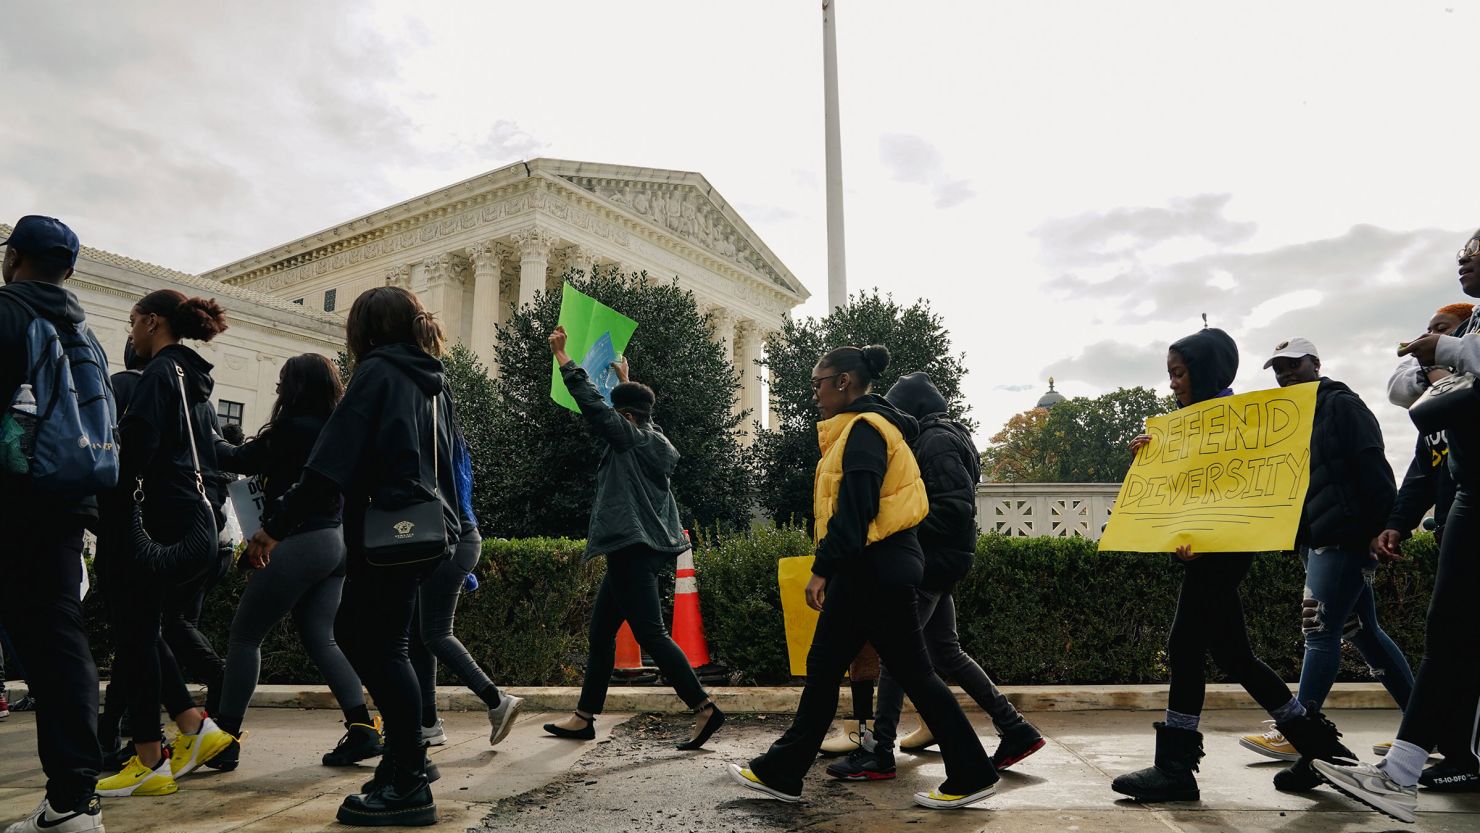 Activists rally outside the Supreme Court in Washington on Monday, Oct. 31, 2022, as the justices hear oral arguments in the affirmative action cases involving Harvard and the University of North Carolina at Chapel Hill. 